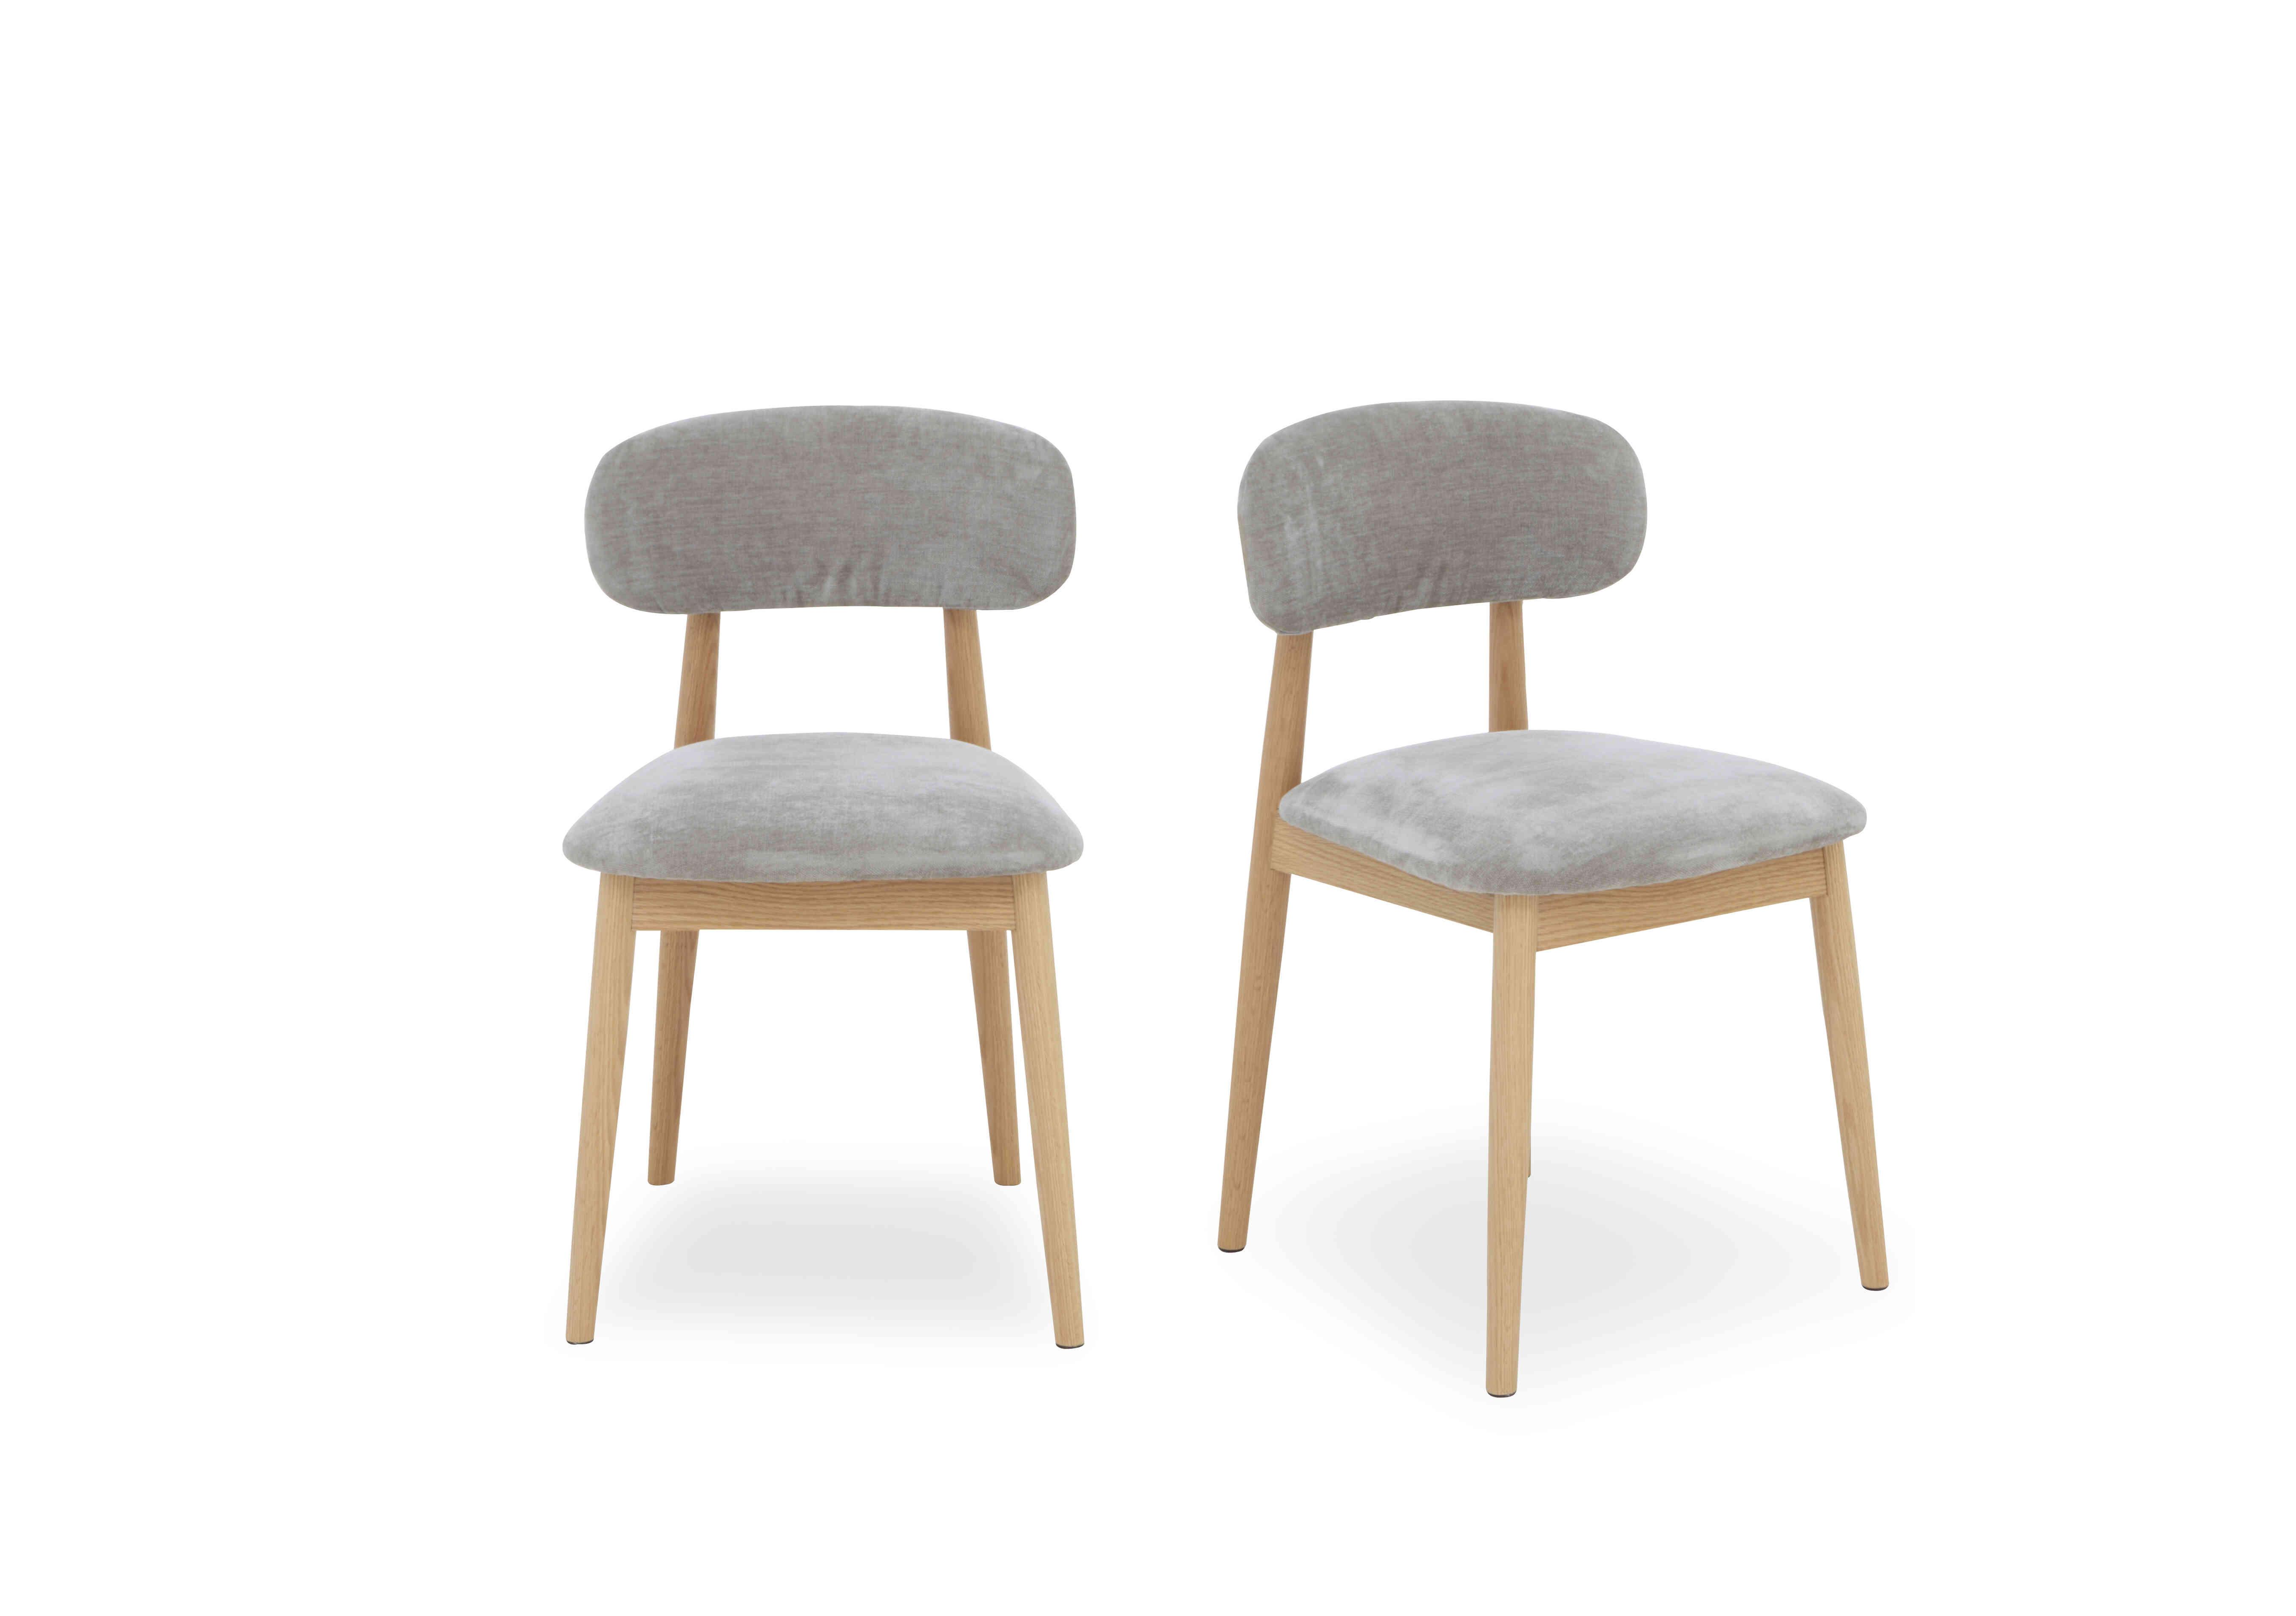 Stockholm Pair of Wooden Dining Chairs in Light Oak on Furniture Village